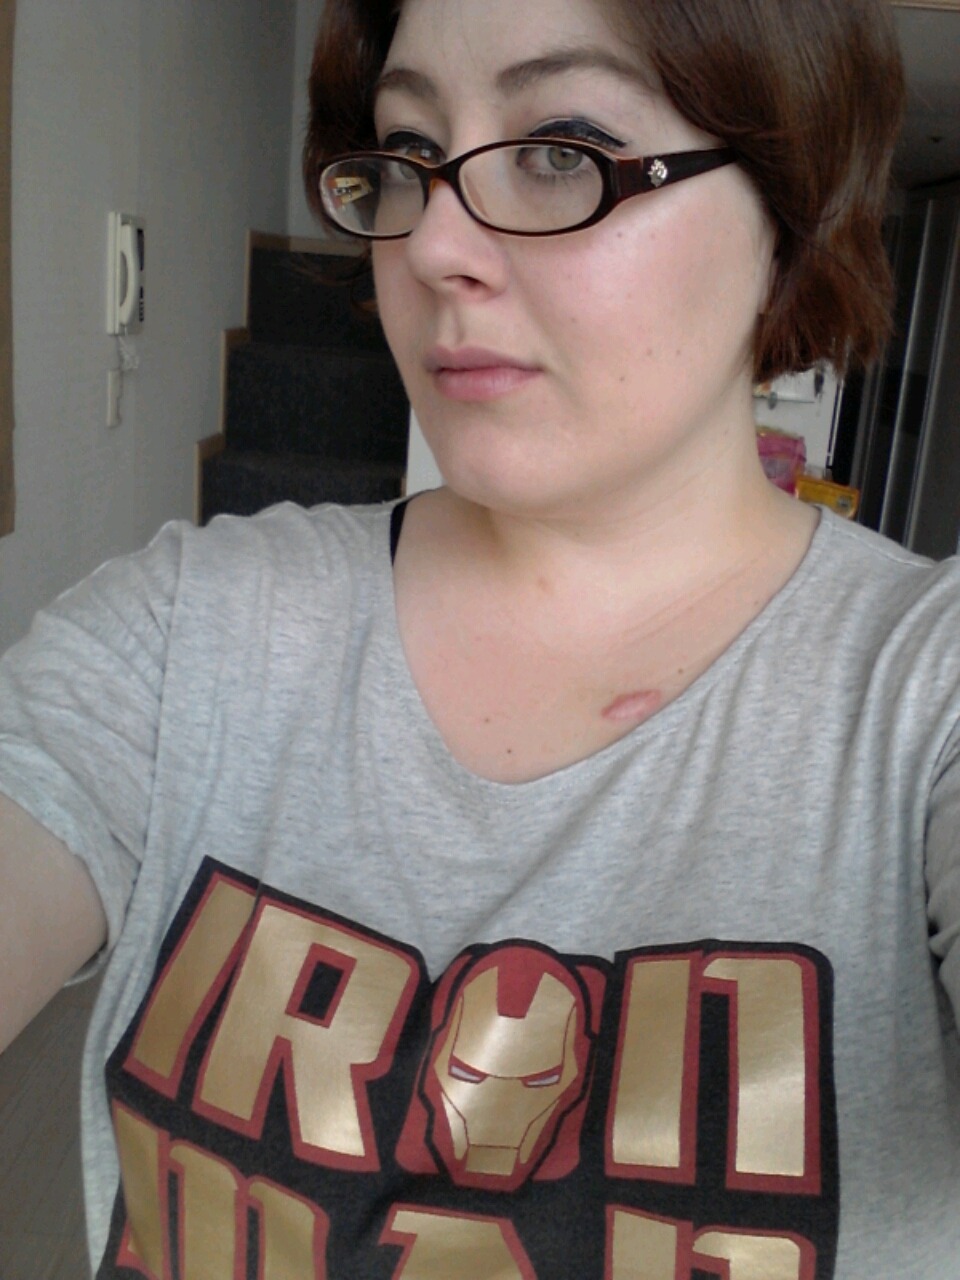 sadly, I have four other Avengers shirts. And today wikl be day three of wearing